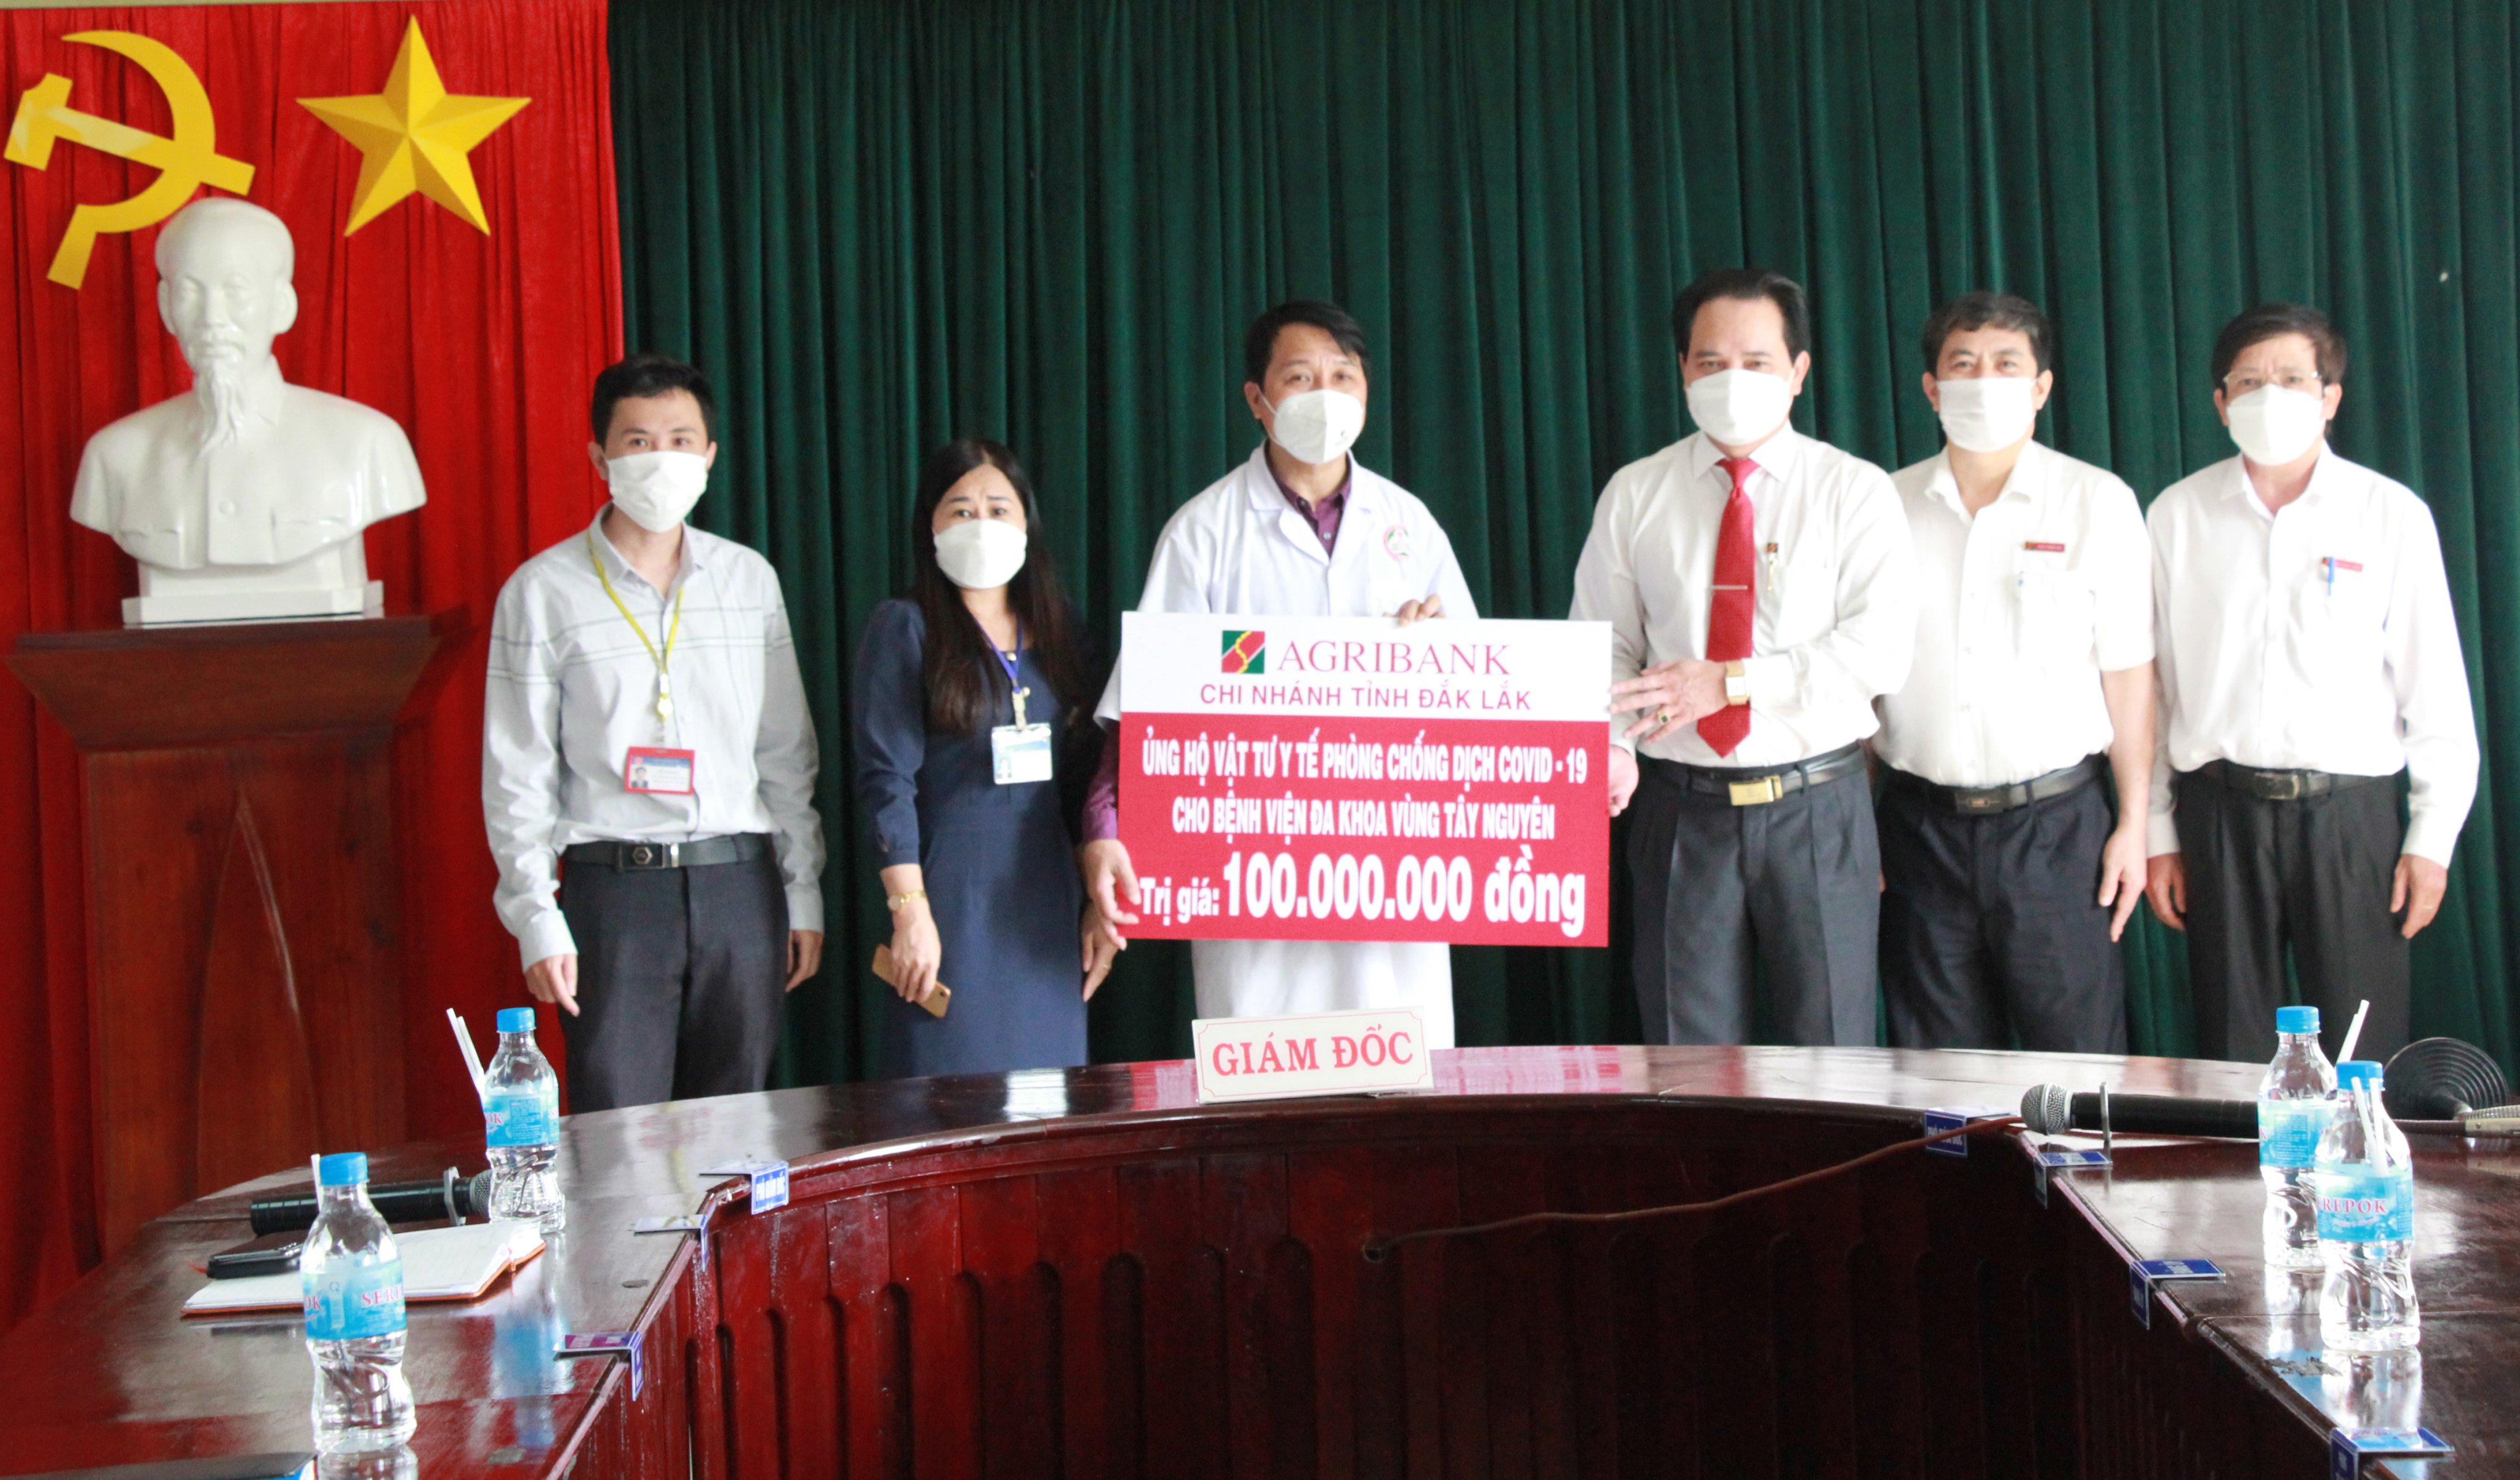 Agribank - Dak Lak Province donated medical supplies to prevent COVID-19